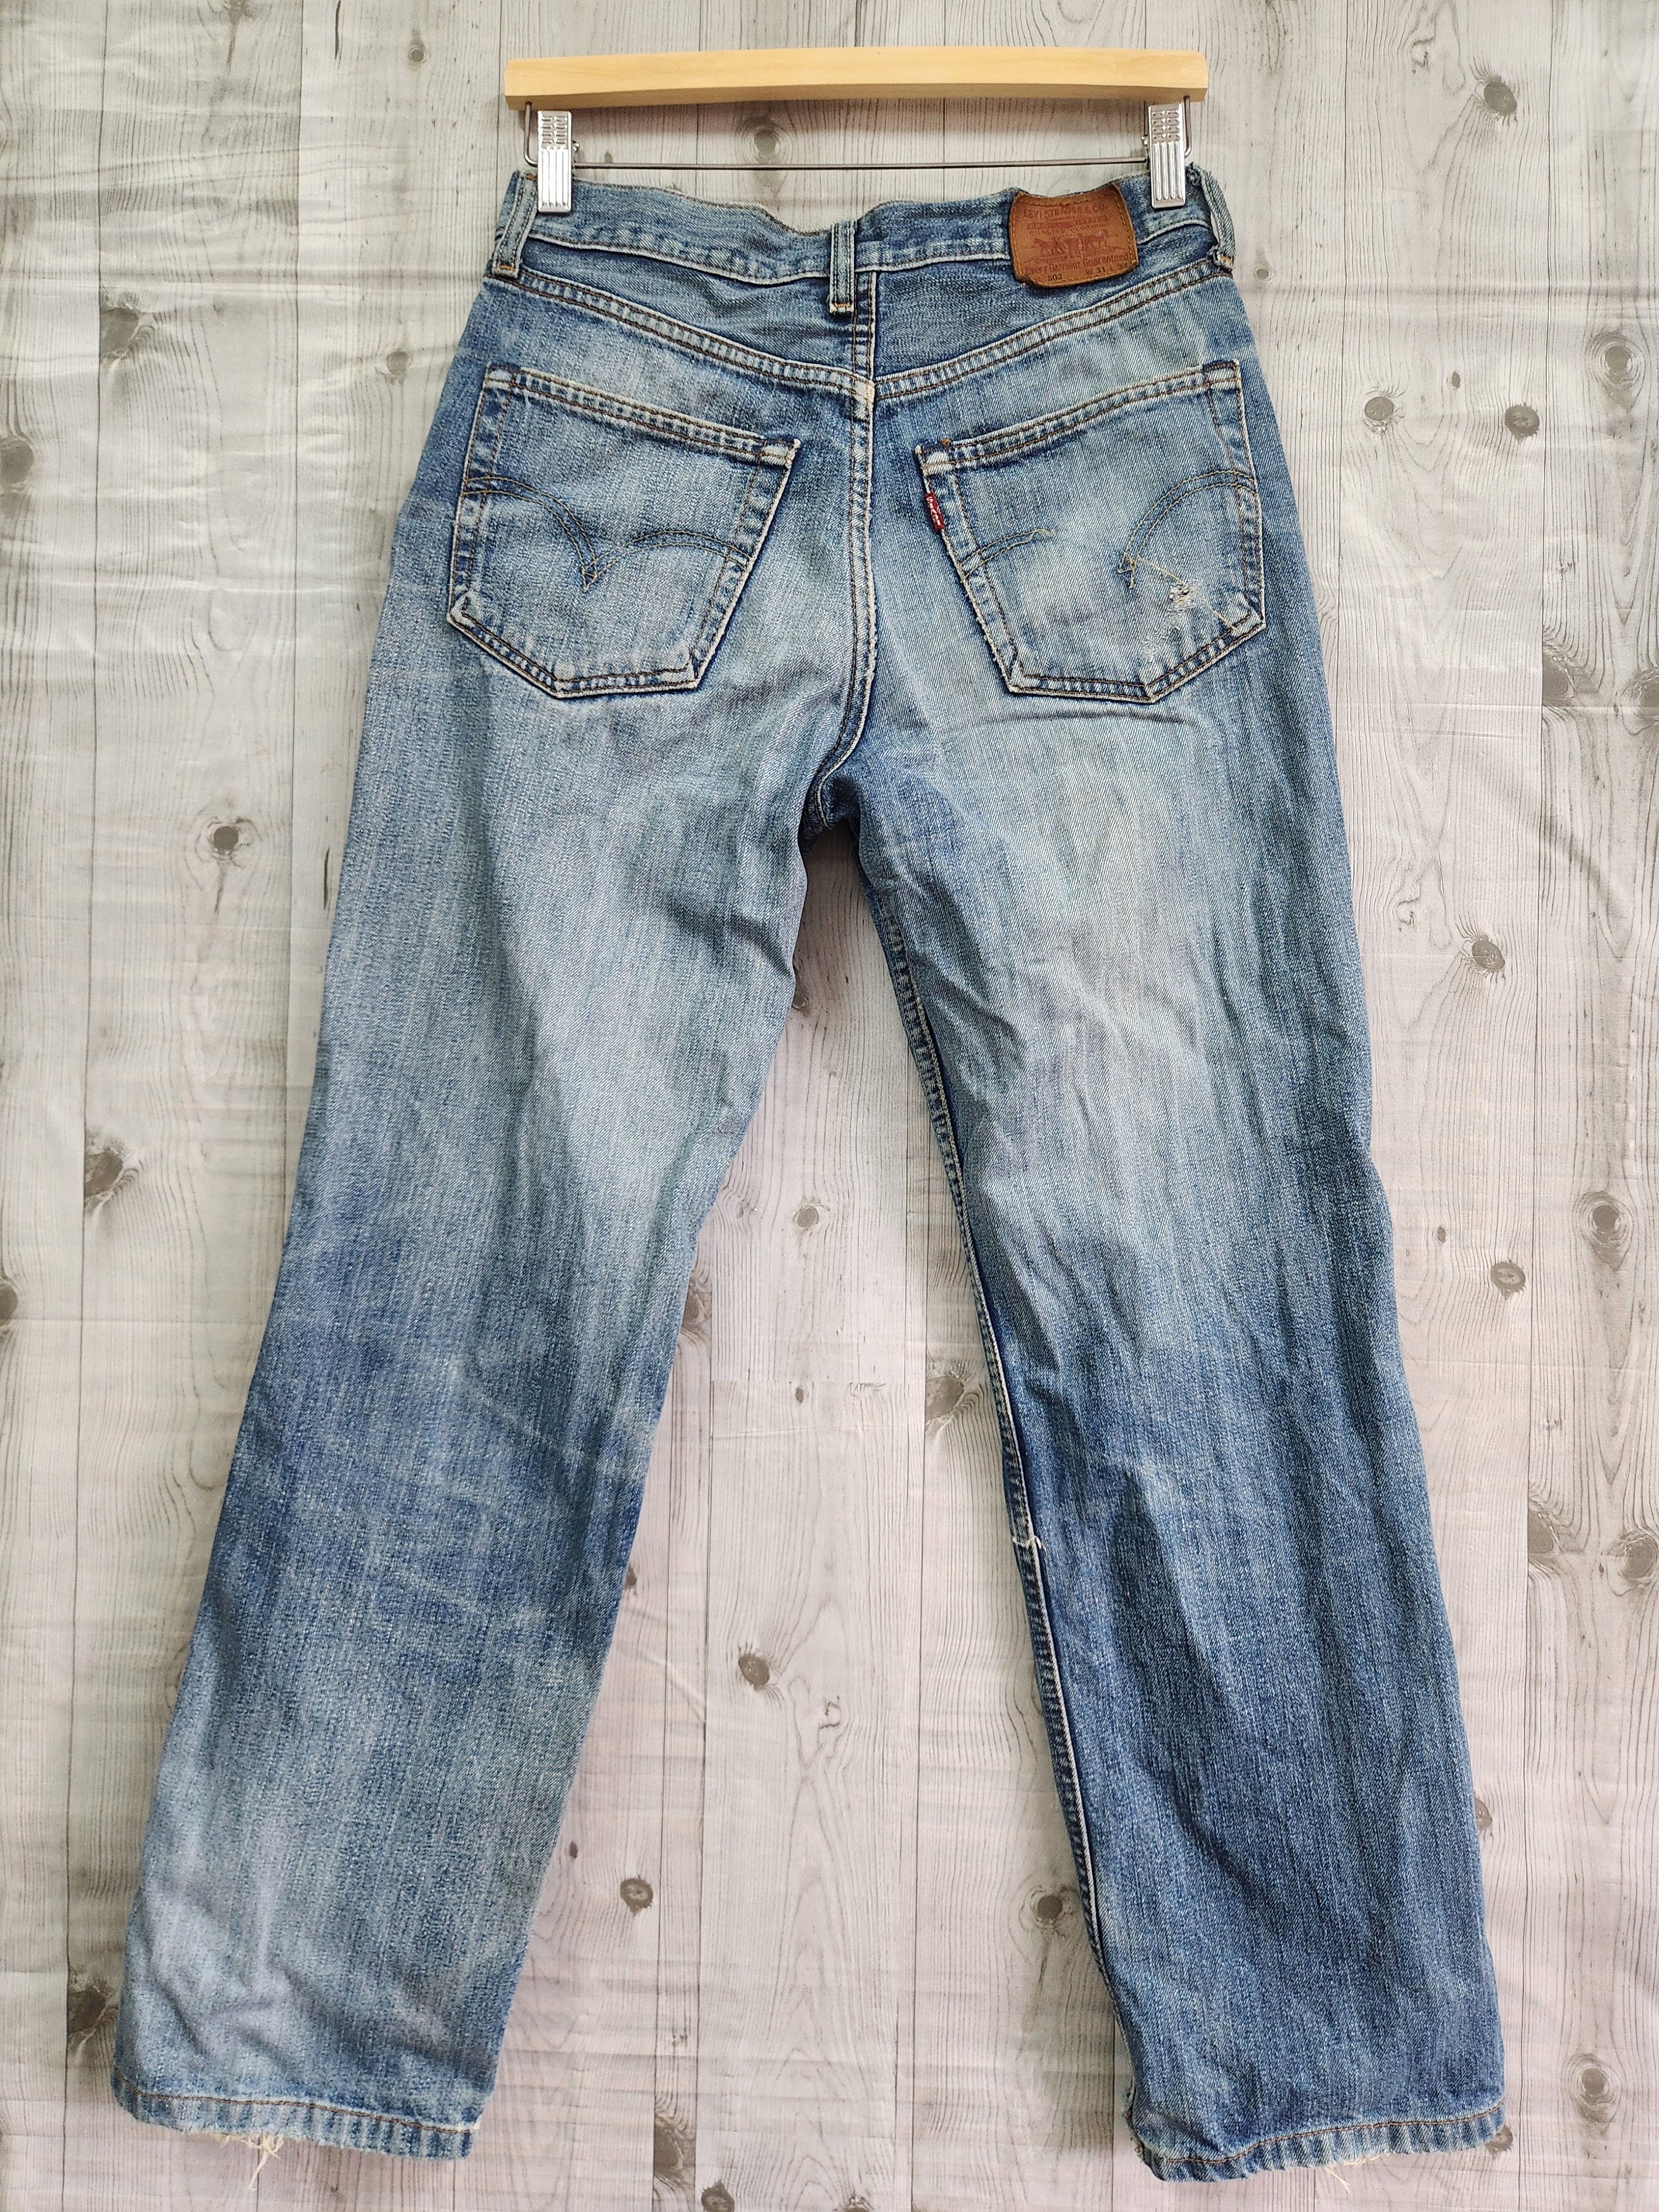 Levis 502 Vintage Distressed Ripped Denim Jeans Year 2002 - 21